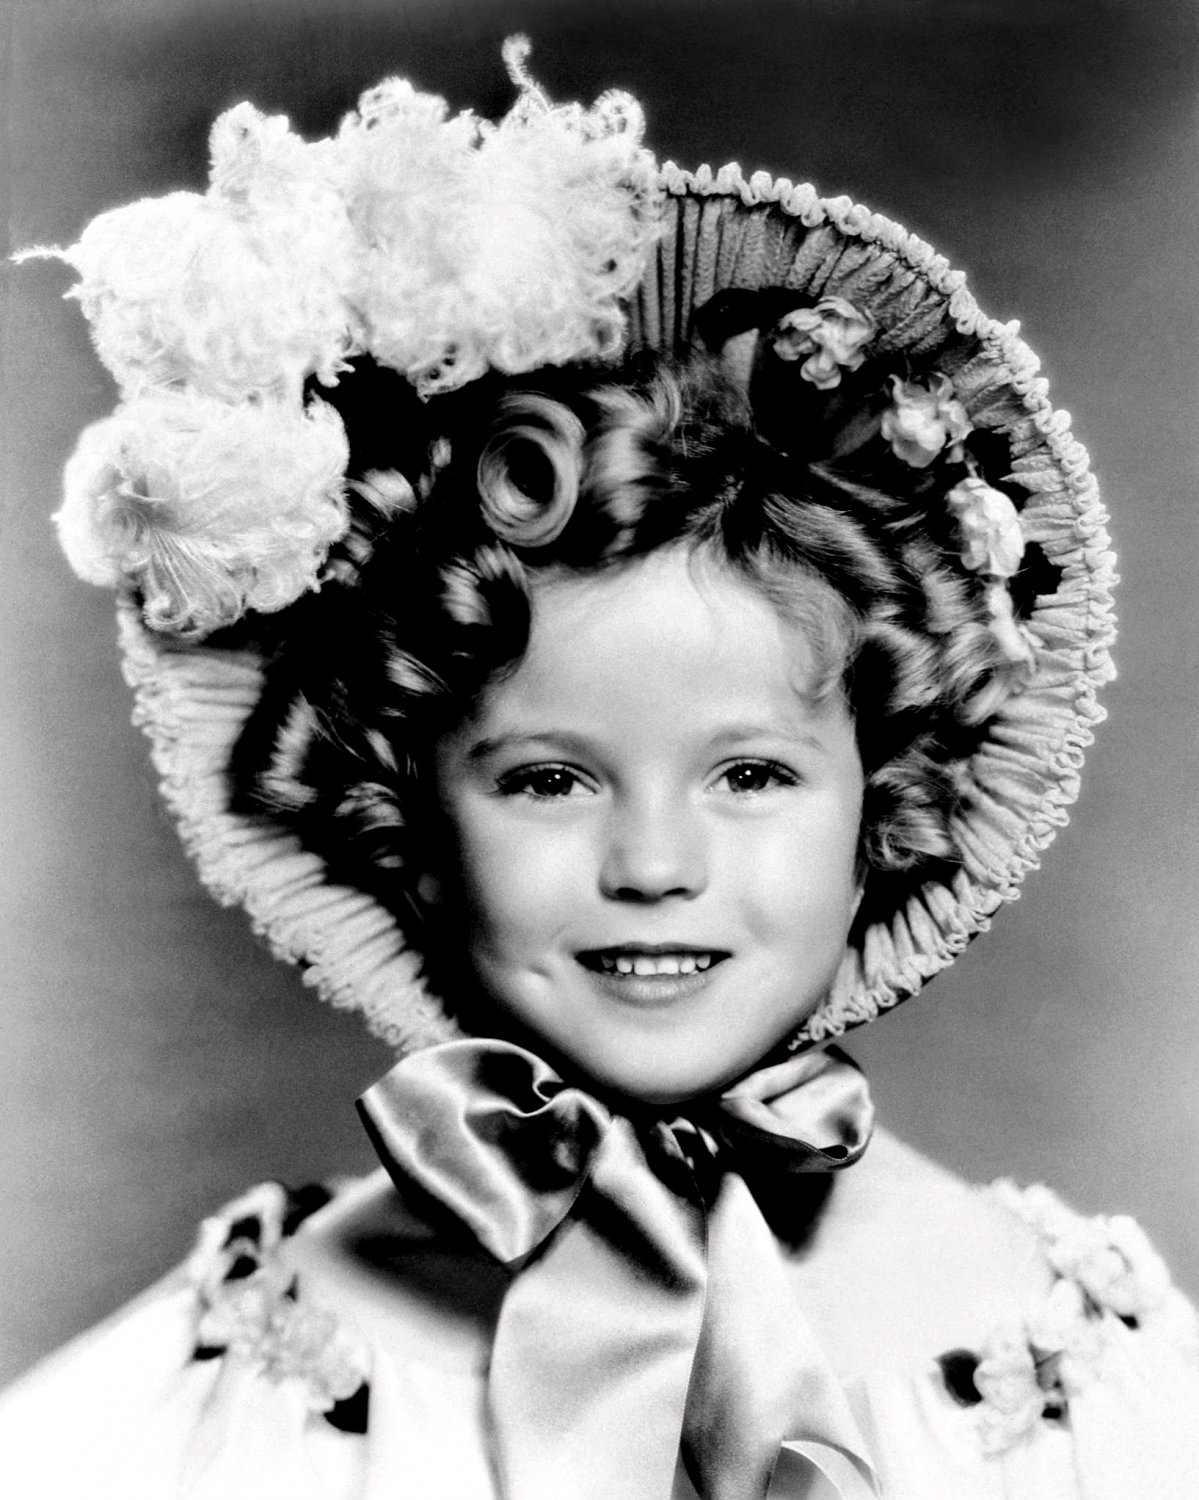 SHIRLEY TEMPLE IN THE FILM "THE LITTLE COLONEL" - 8X10 PUBLICITY PHOTO